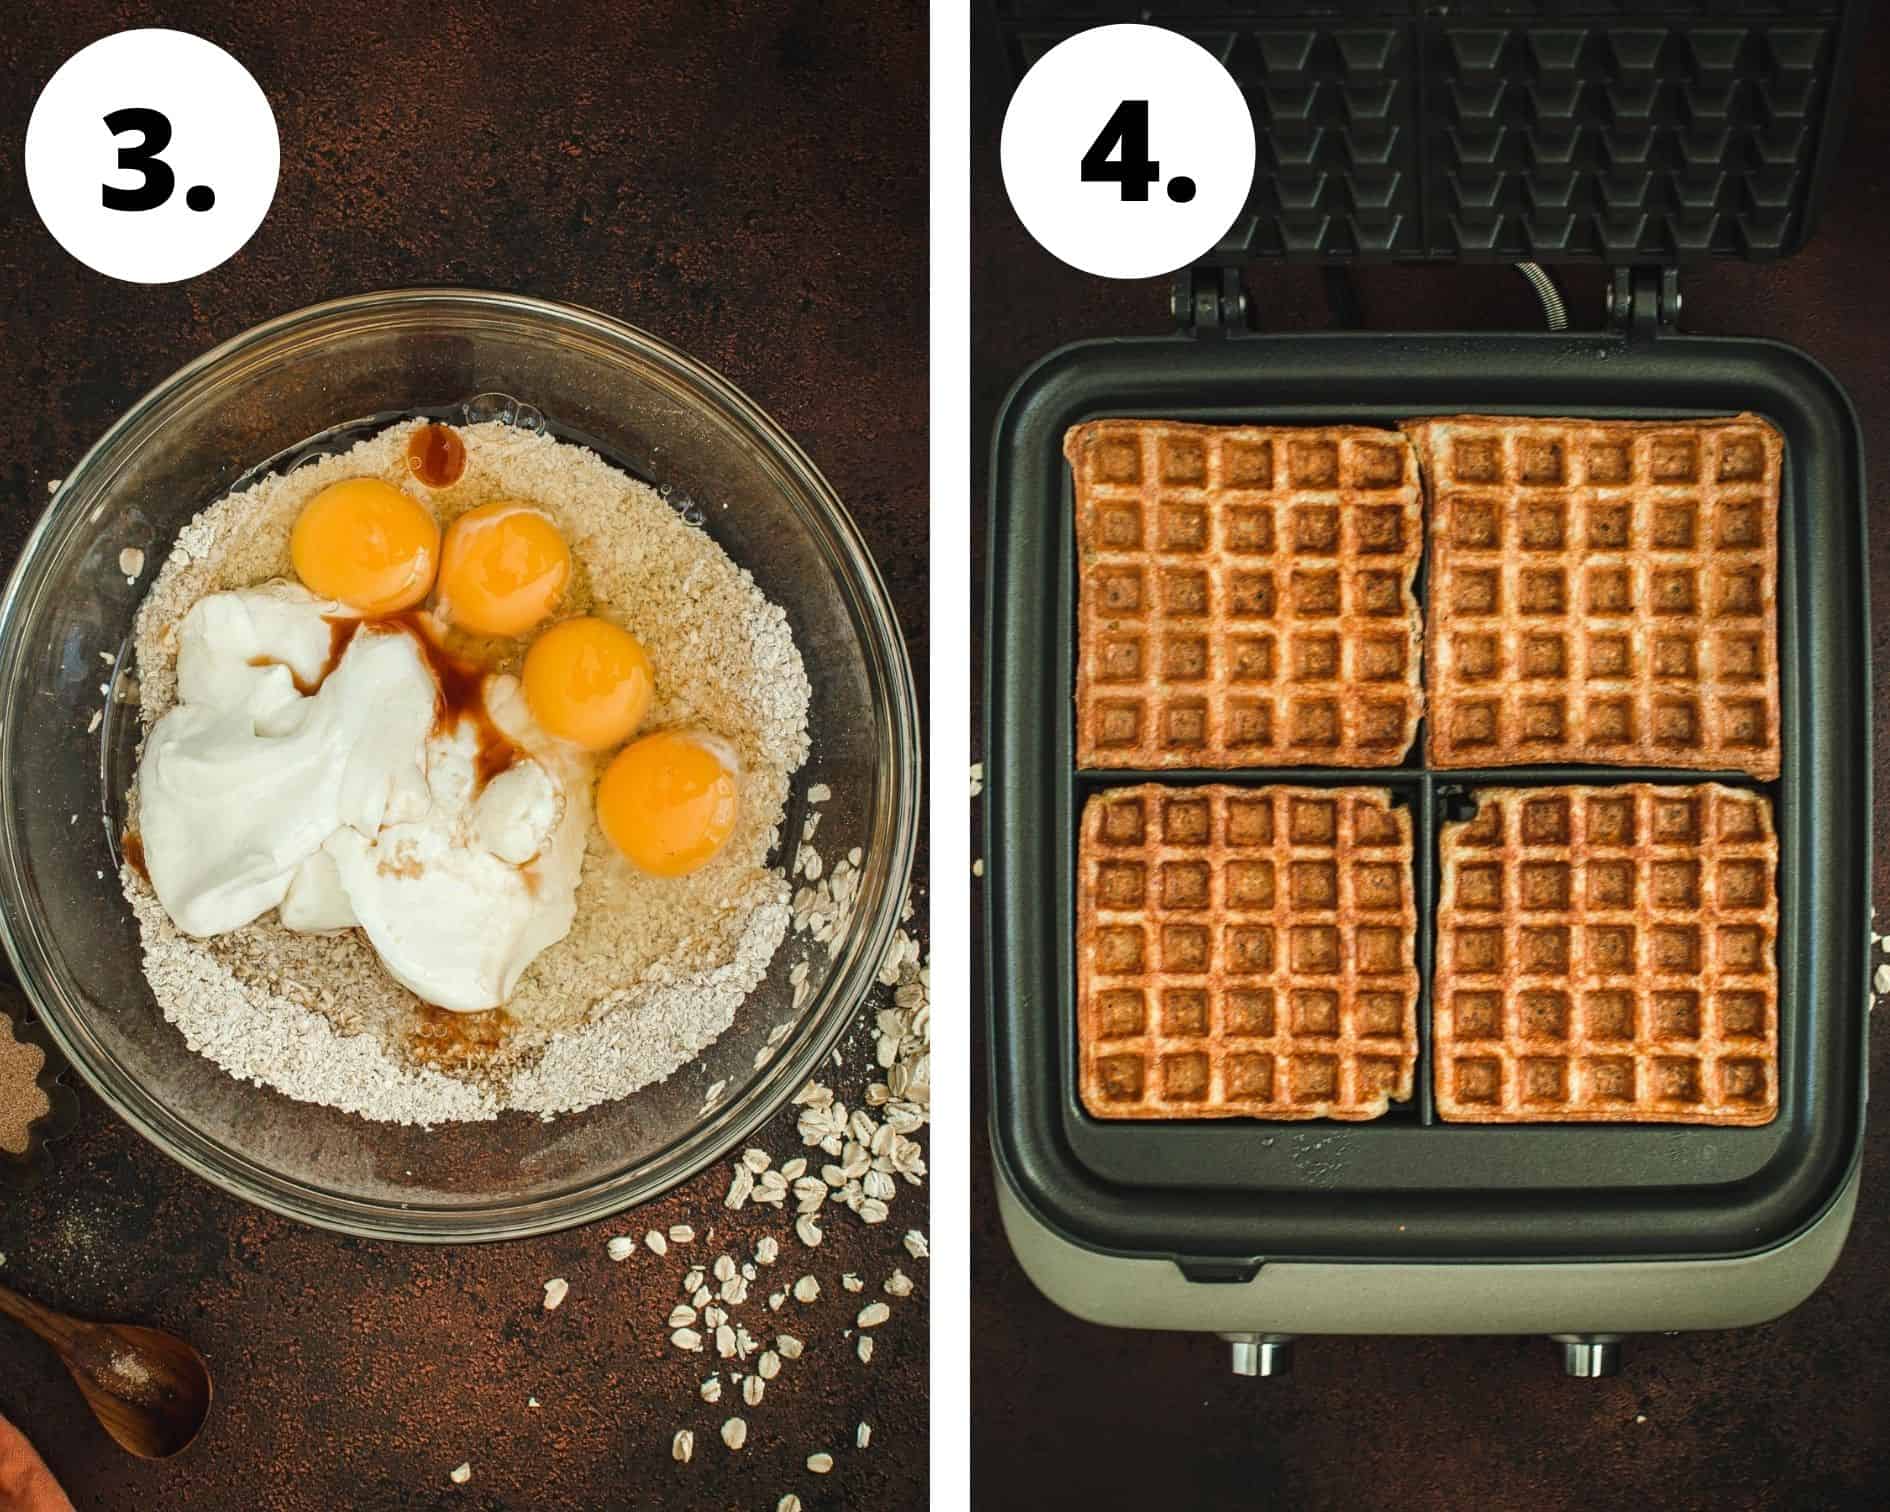 Protein waffles process steps 3 and 4.